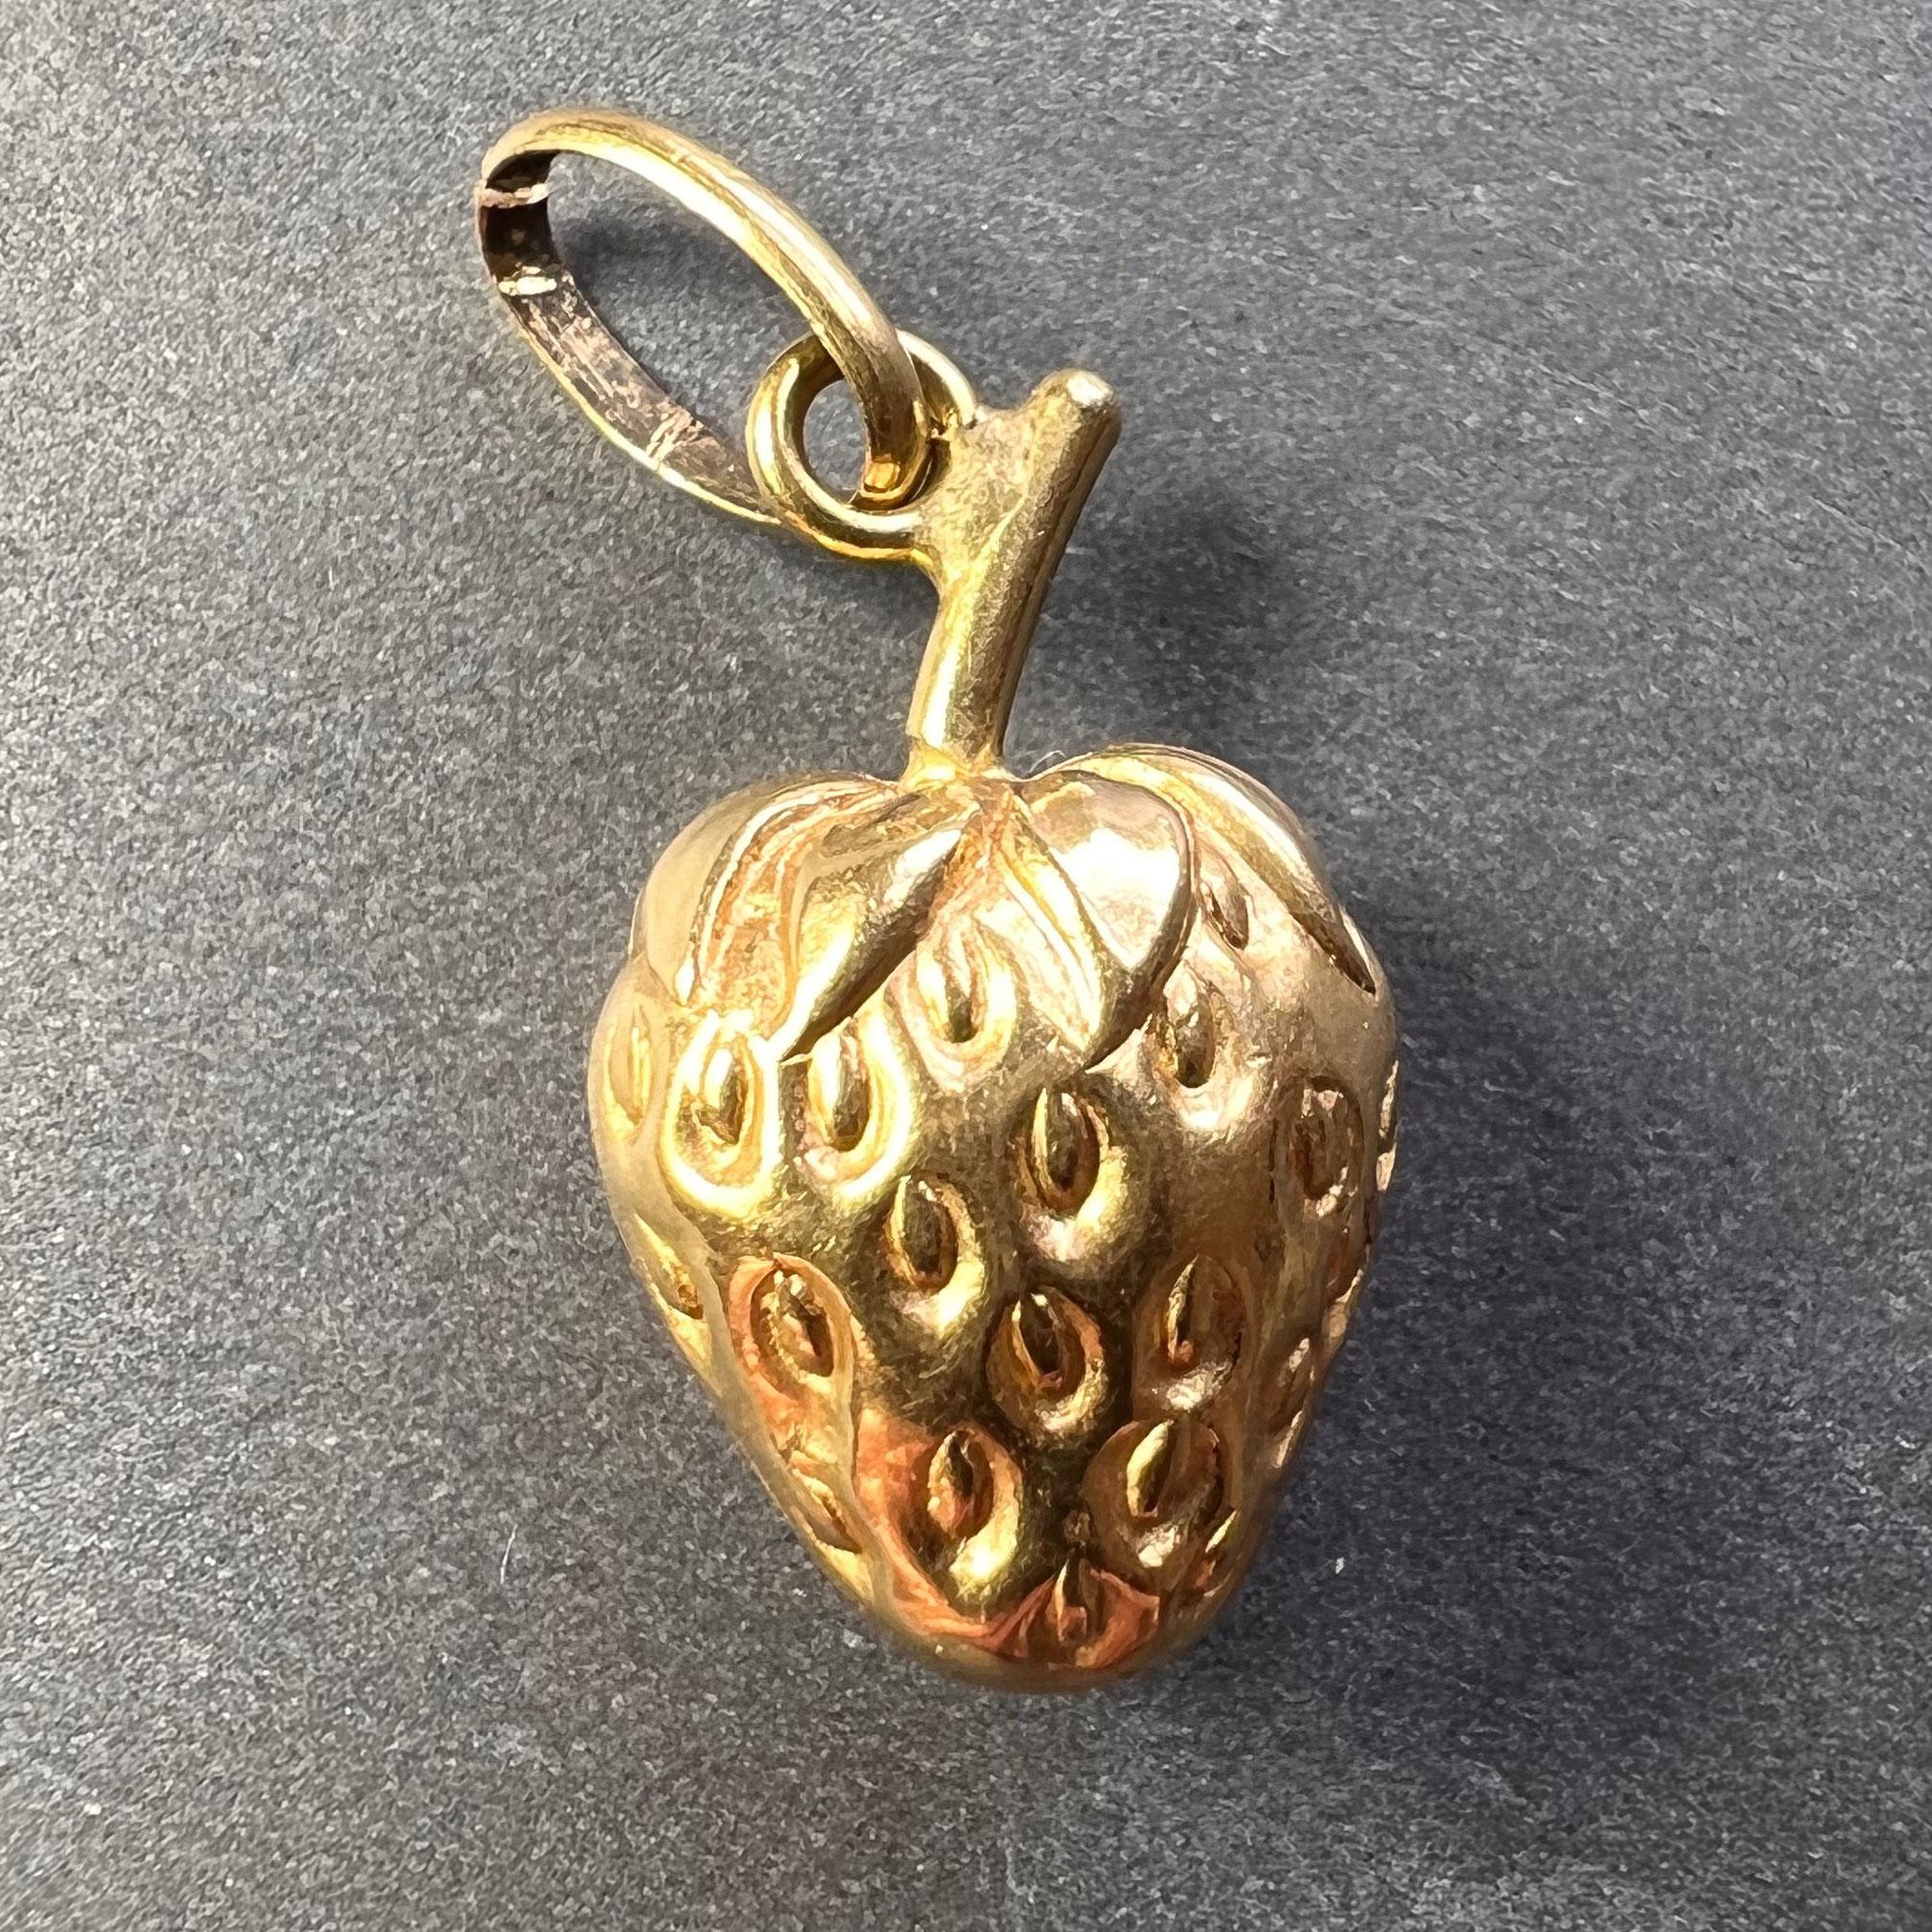 An 18 karat (18K) yellow gold fruit charm pendant designed as a strawberry. Unmarked but tested as 18 karat gold.
 
Dimensions: 1.9 x 1.1 x 0.75 cm (not including jump ring)
Weight: 1.72 grams
